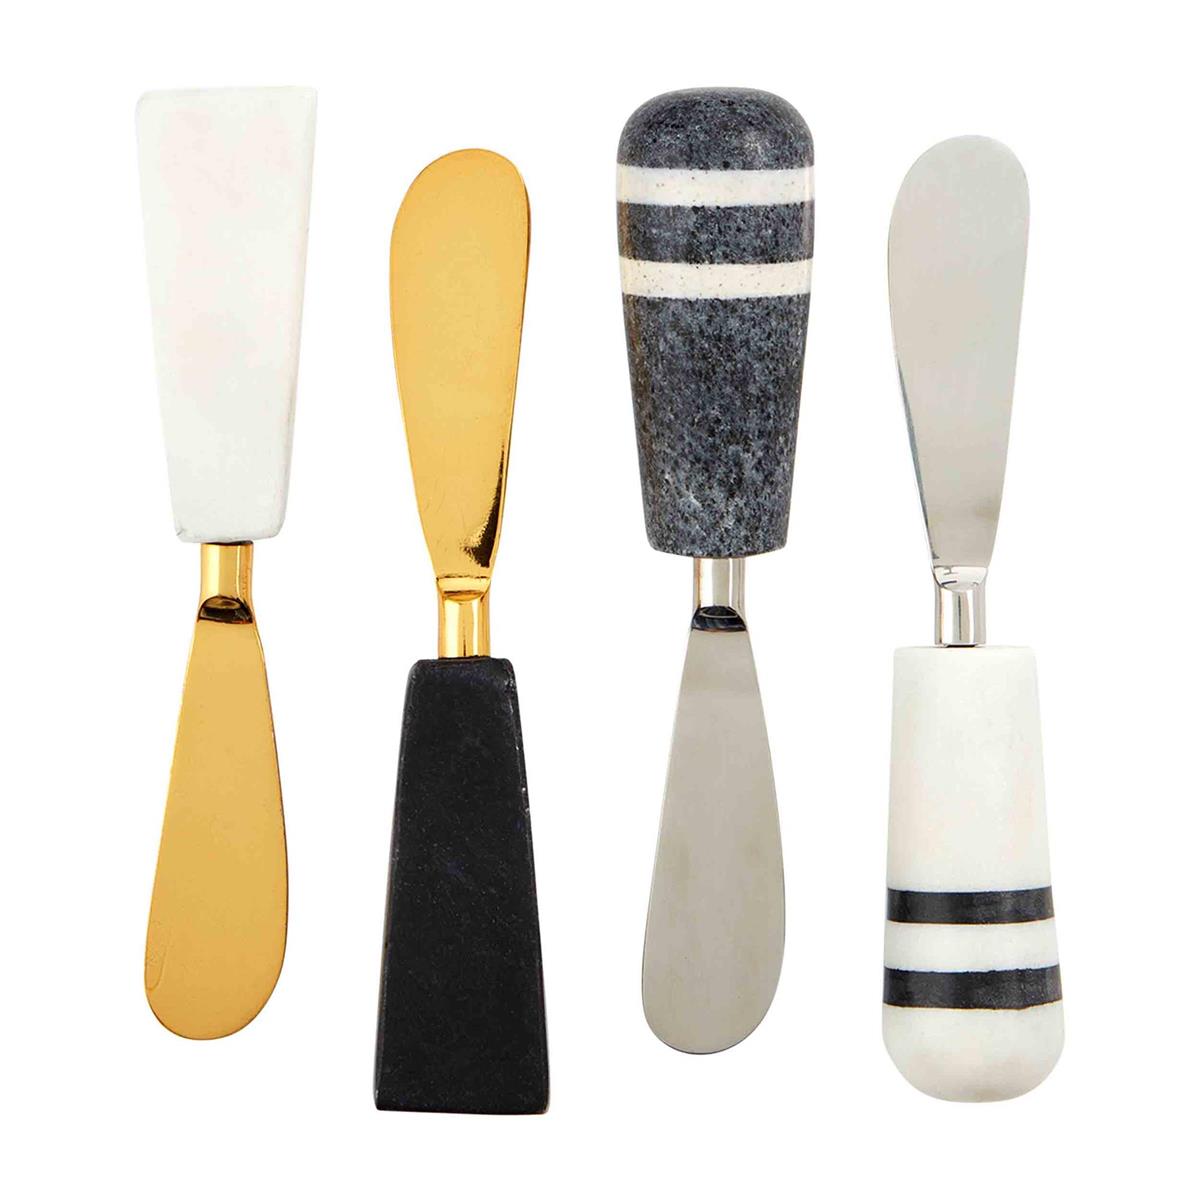 all four styles of marble handled spreaders on a white background